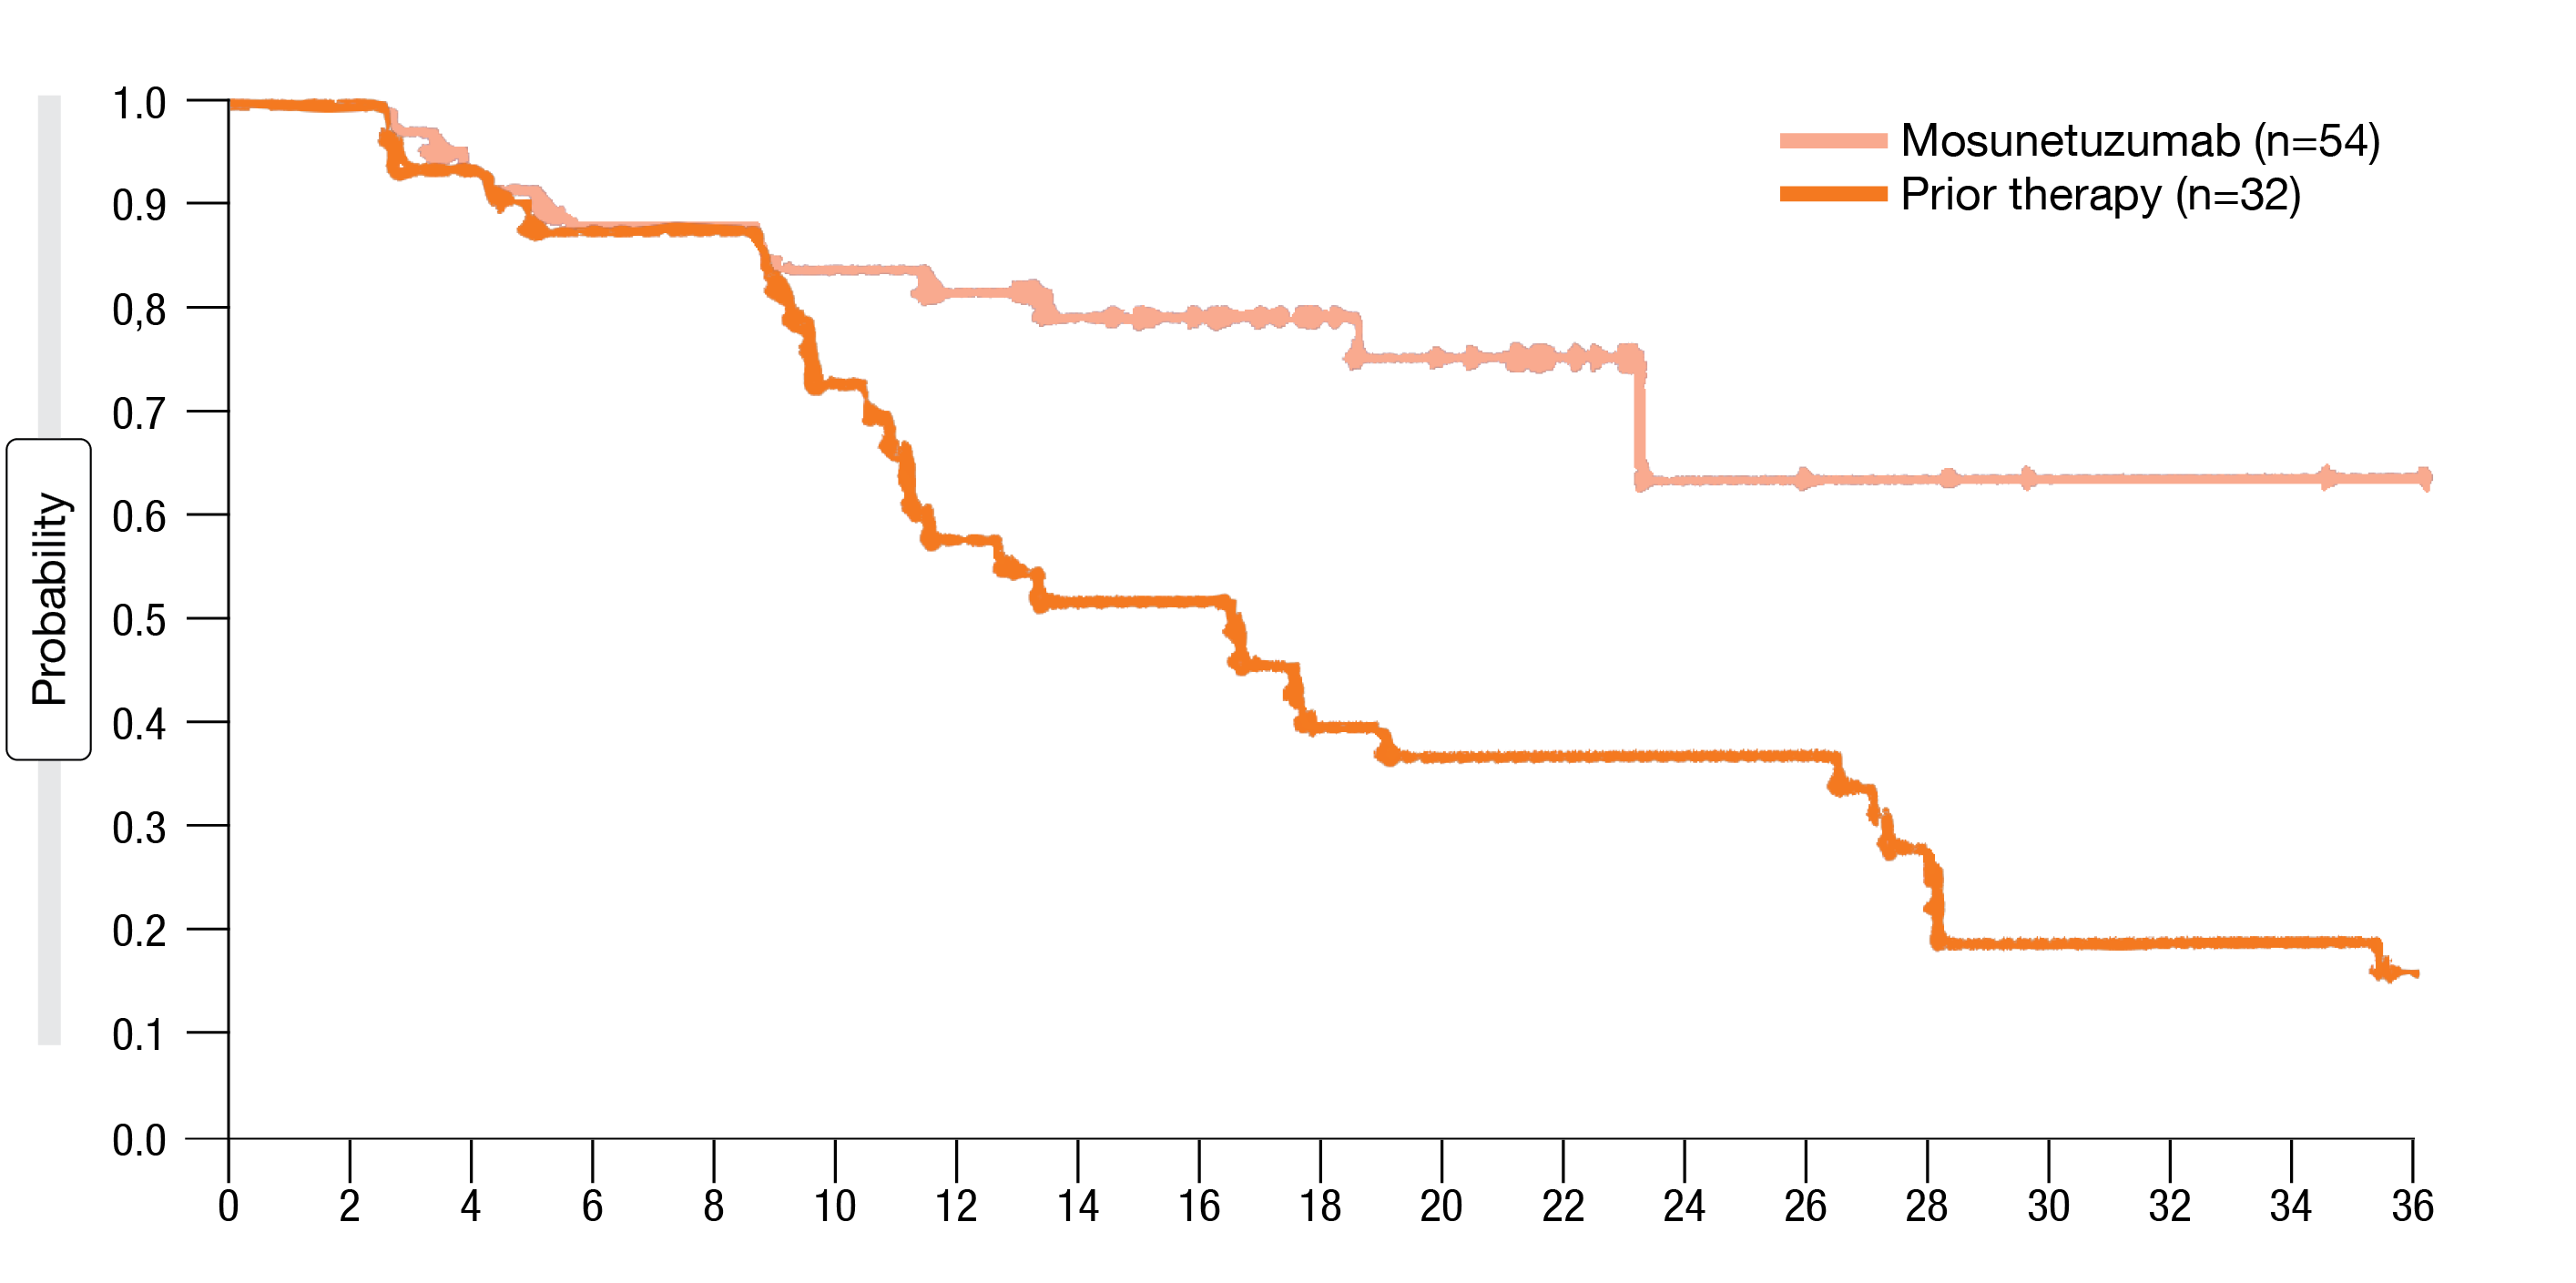 Figure 2: Duration of complete remission with mosunetuzumab vs. prior treatment